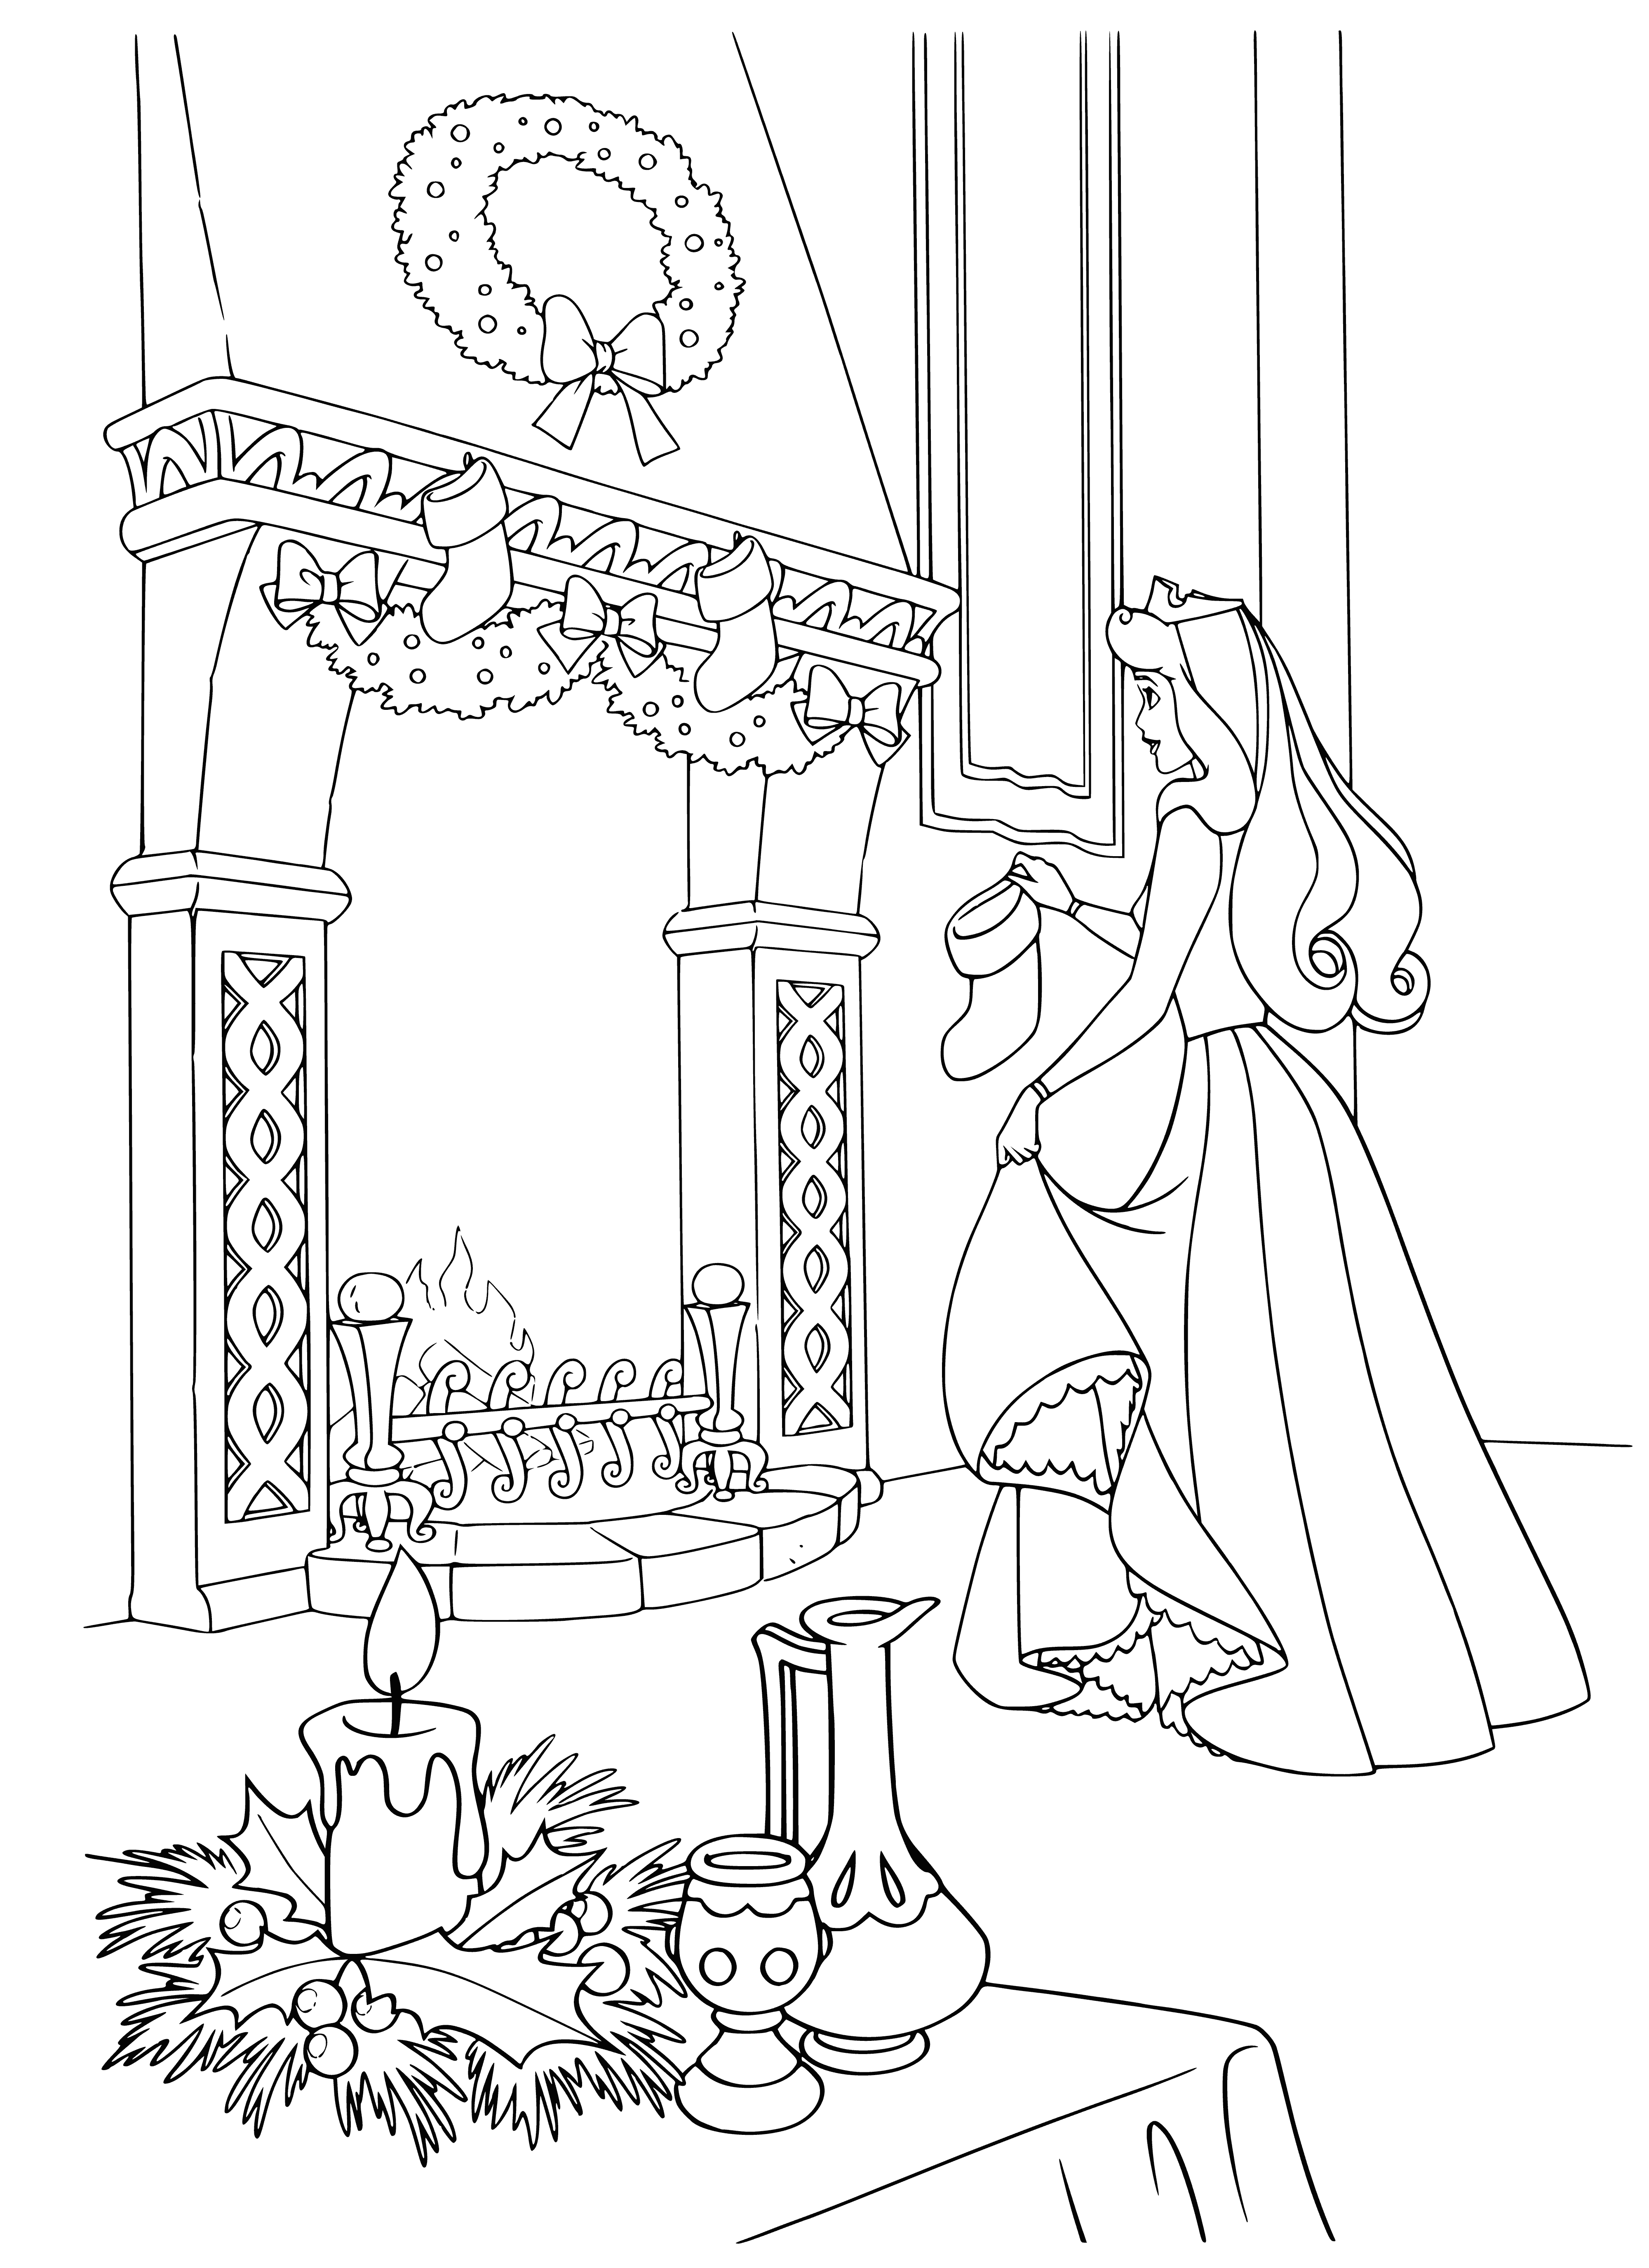 Aurora decorates the fireplace coloring page